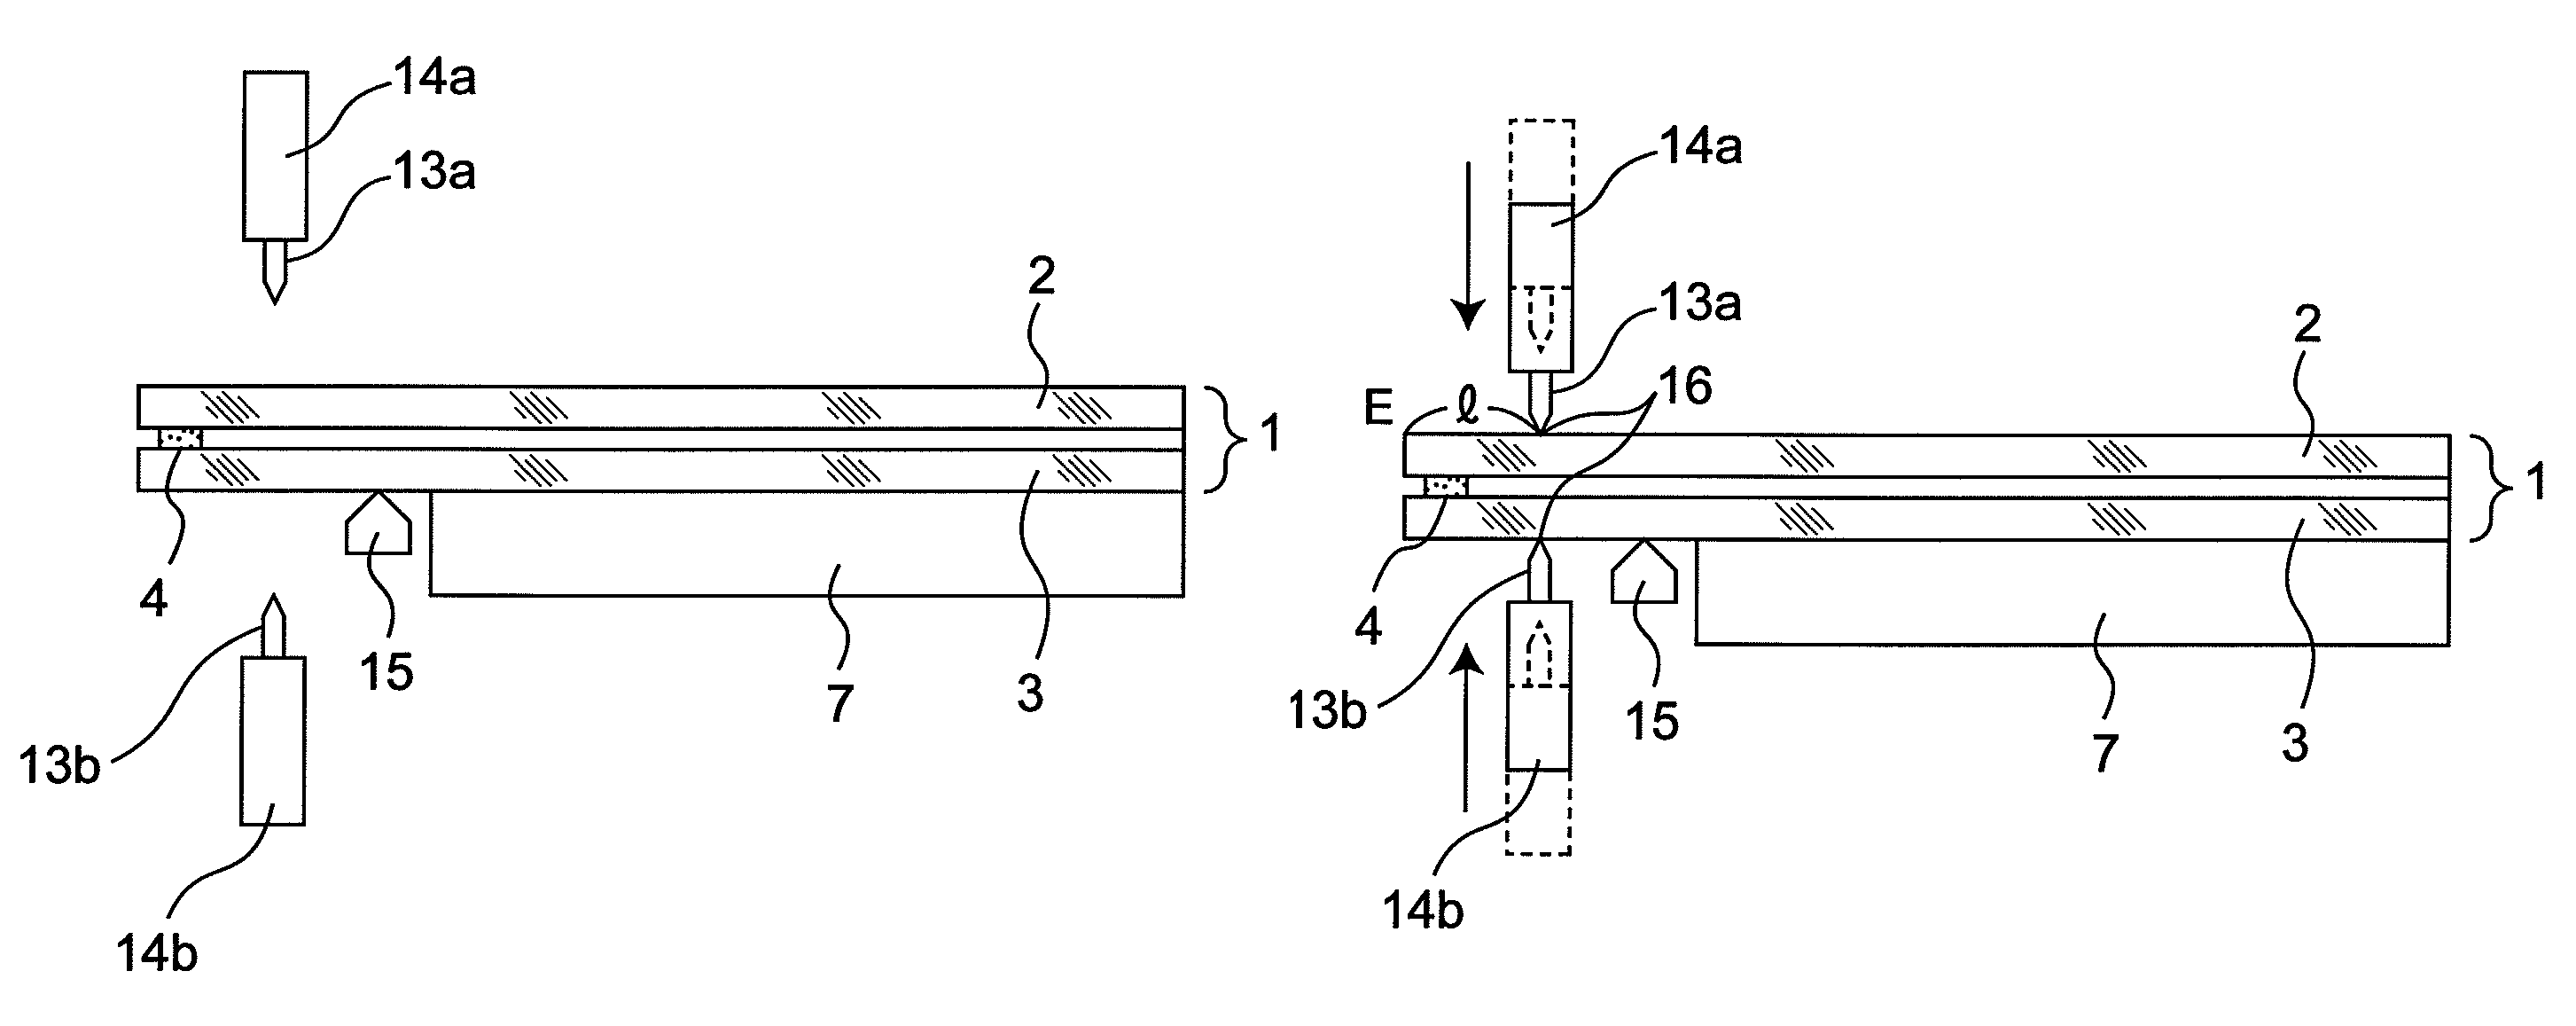 Glass cutting apparatus, glass-substrate disassembling apparatus, glass-substrate disassembling system, glass cutting method, and glass-substrate disassembling method